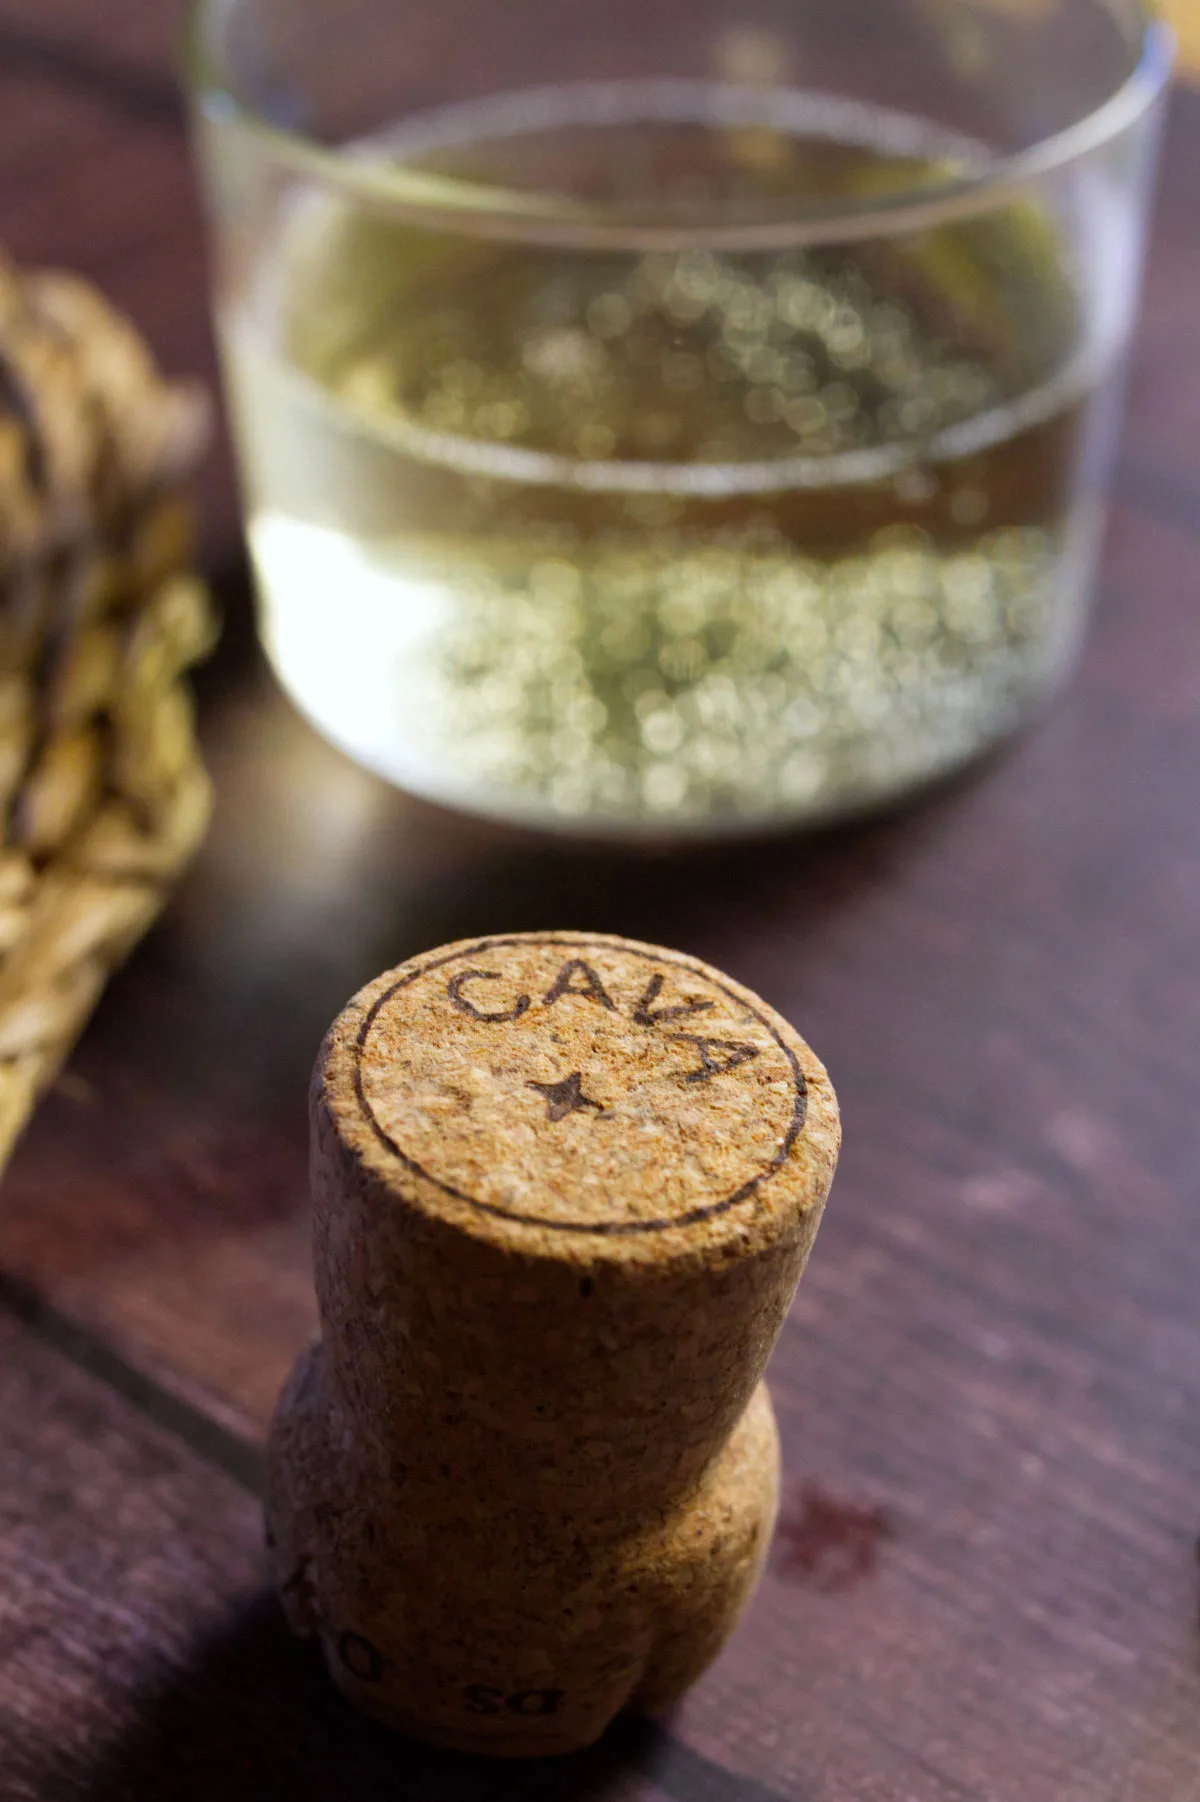 A cork from an opened bottle of Cava sits beside a glass of Cava.